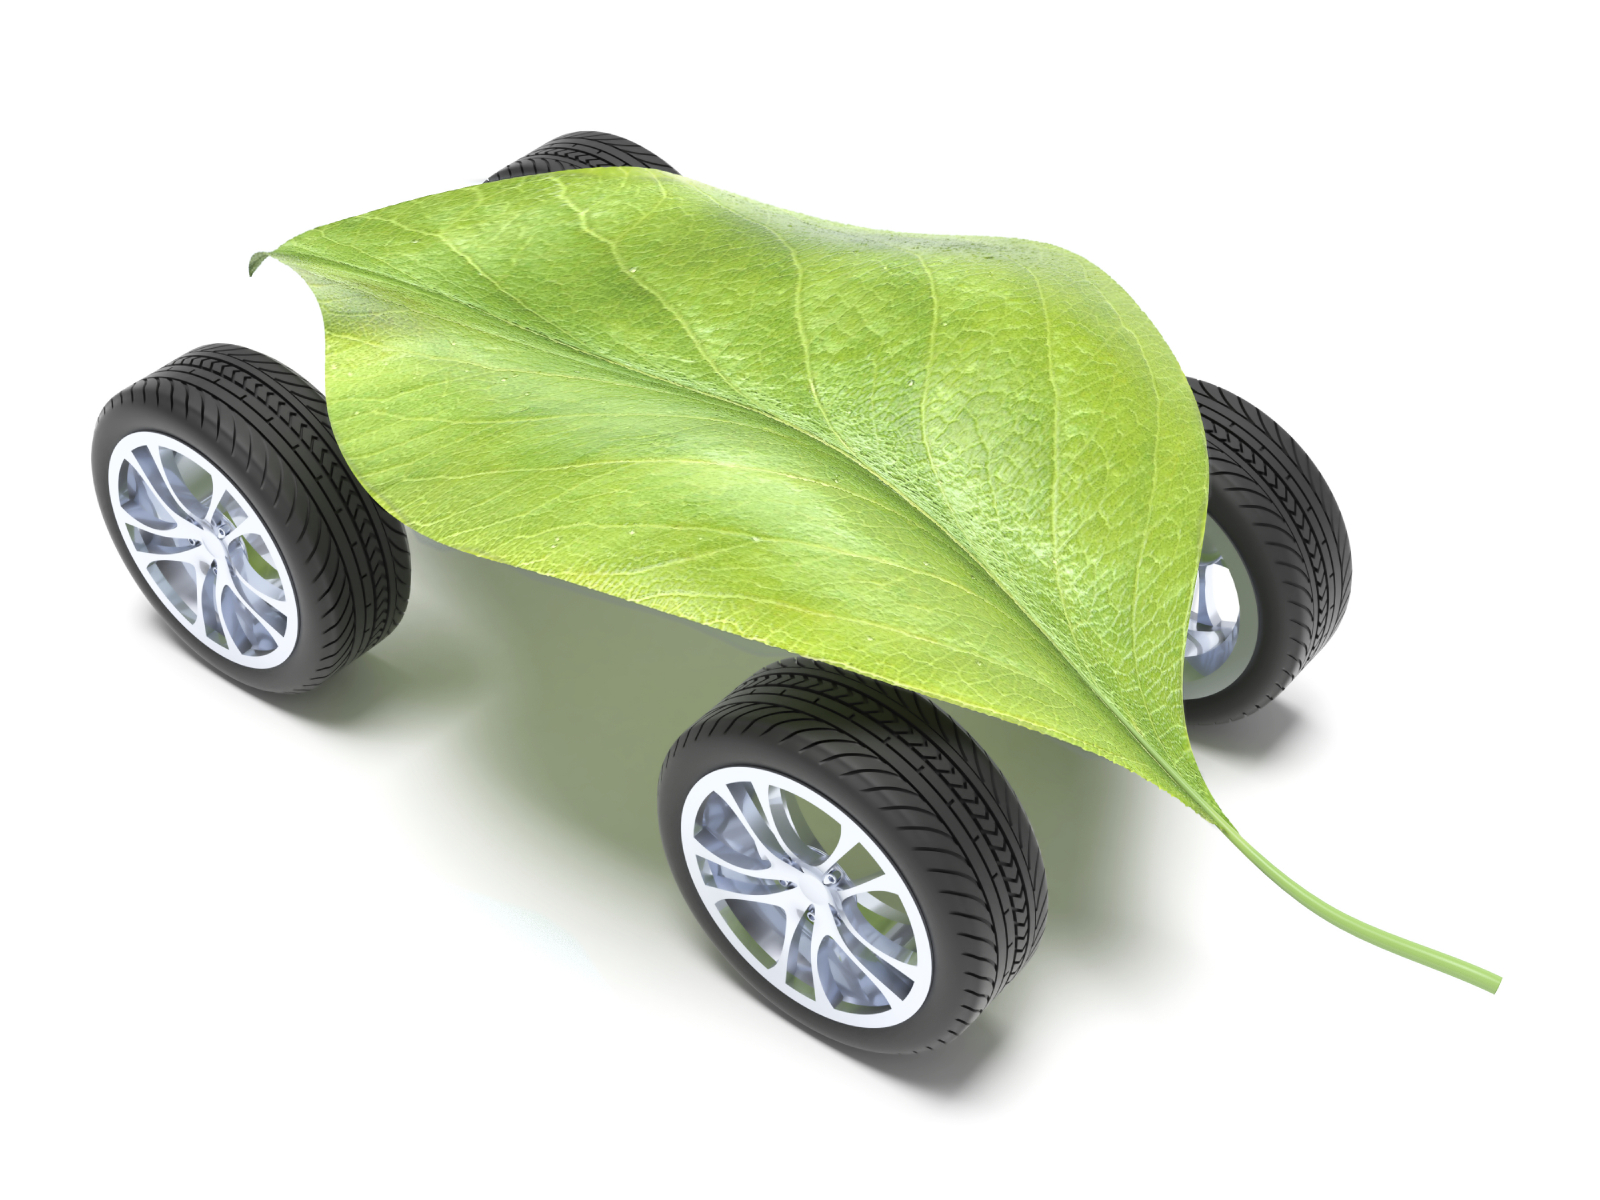 The Southern Green Living Expo Announces EcoFriendly Vehicle Test Drives